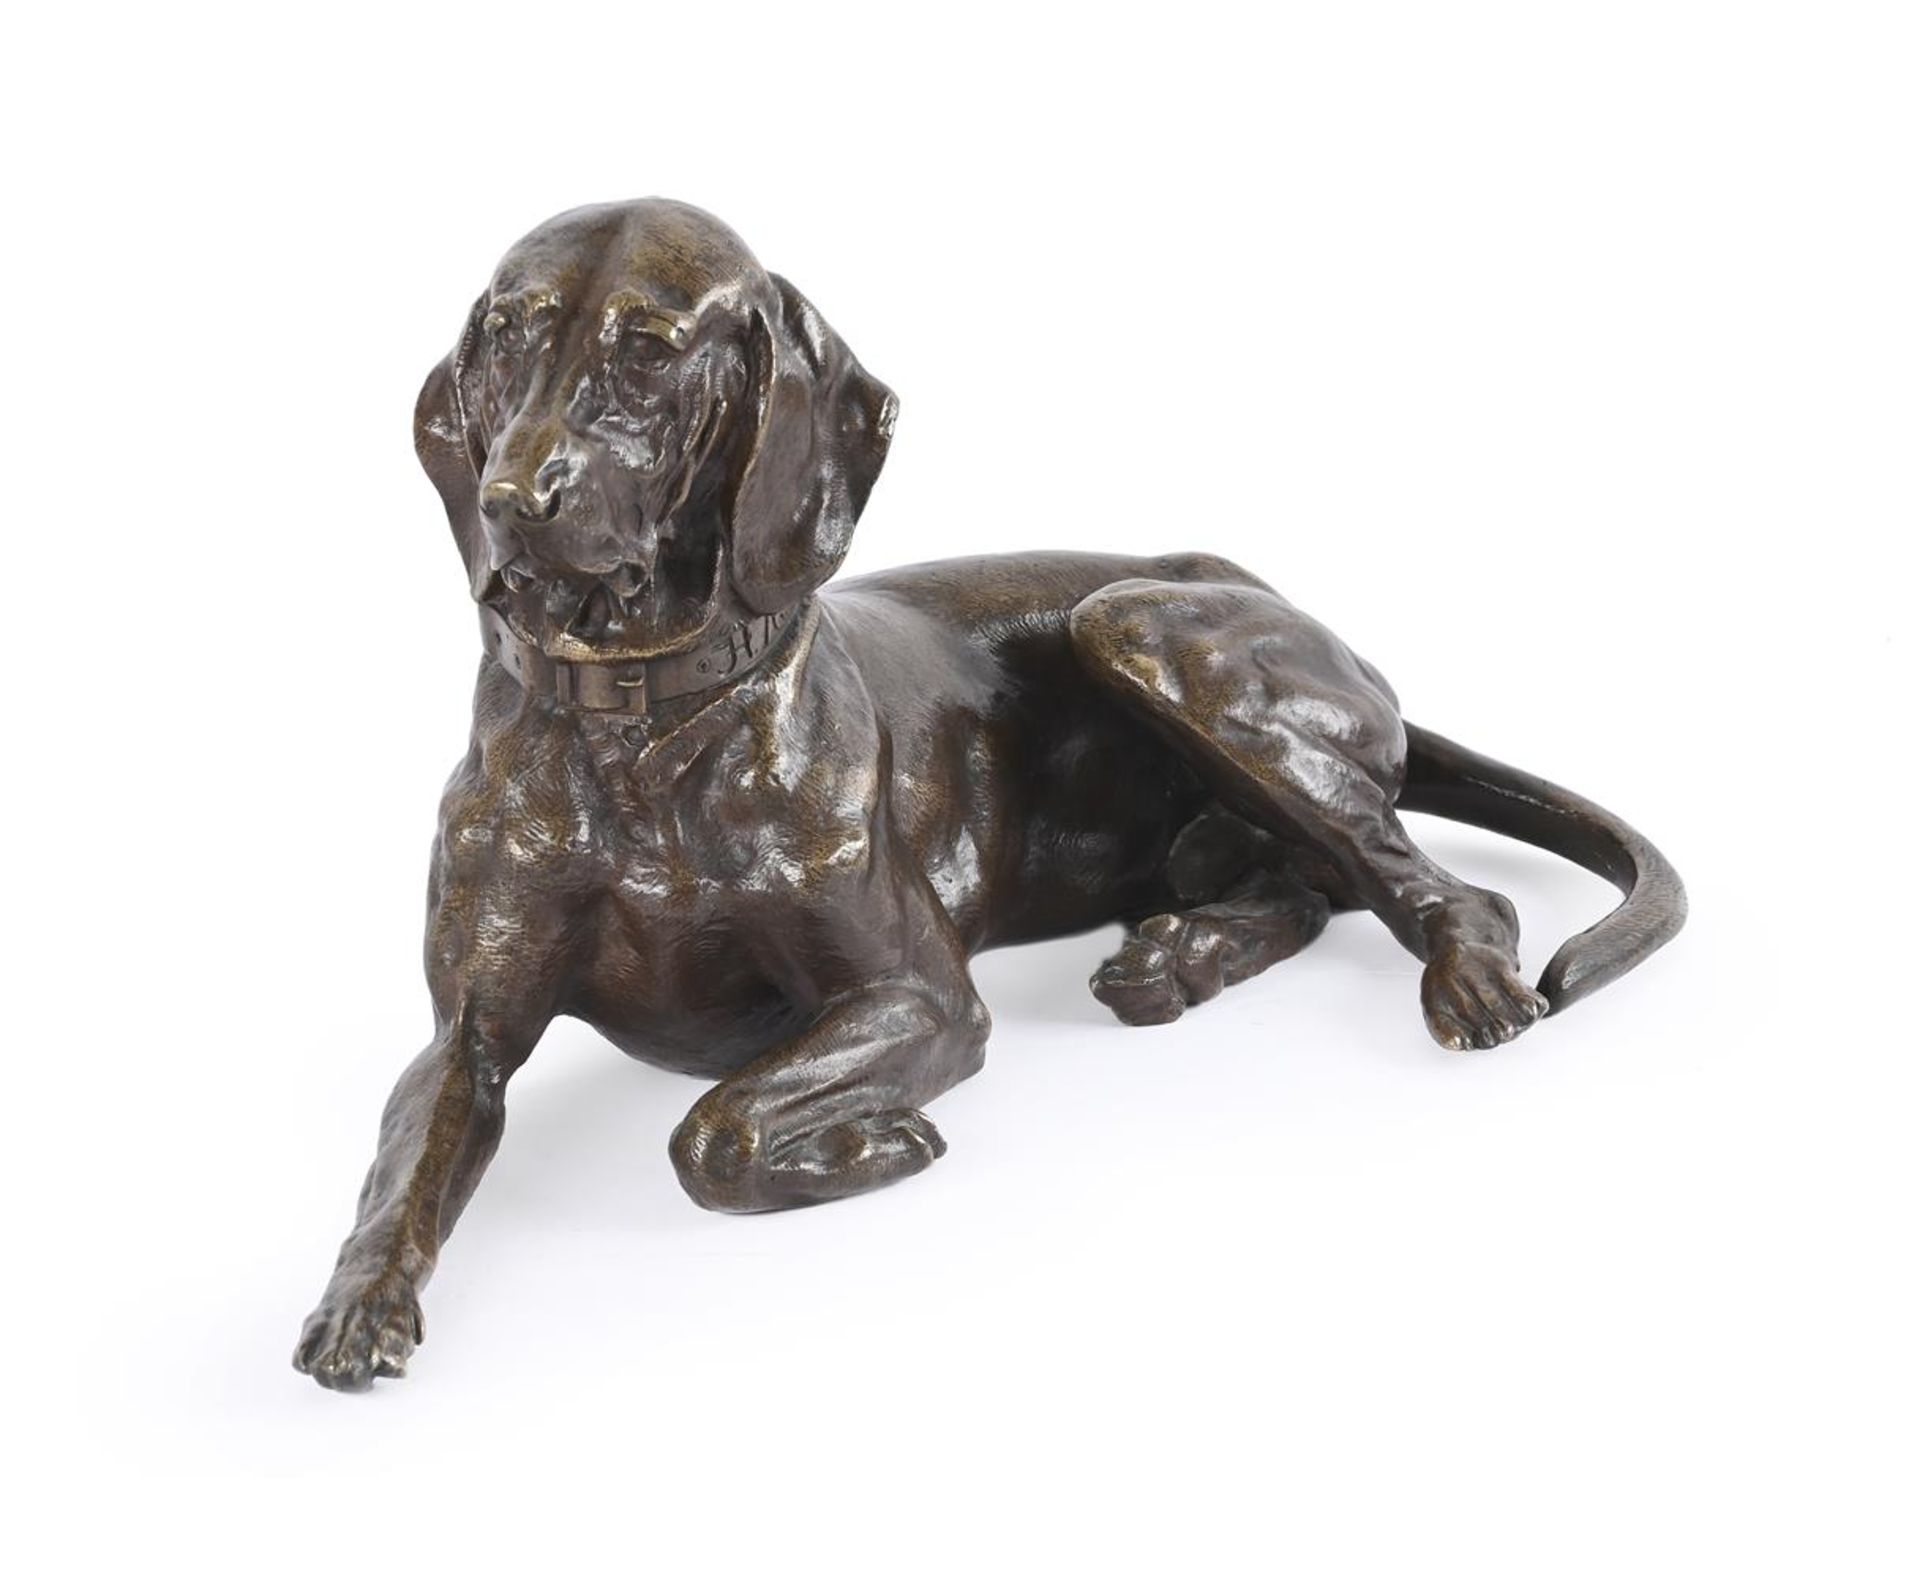 AFTER NIKOLAI LIEBERICH (RUSSIAN, 1828-1883), CAST BY WOERFFEL, A BRONZE FIGURE OF A POINTER DOG - Image 2 of 4